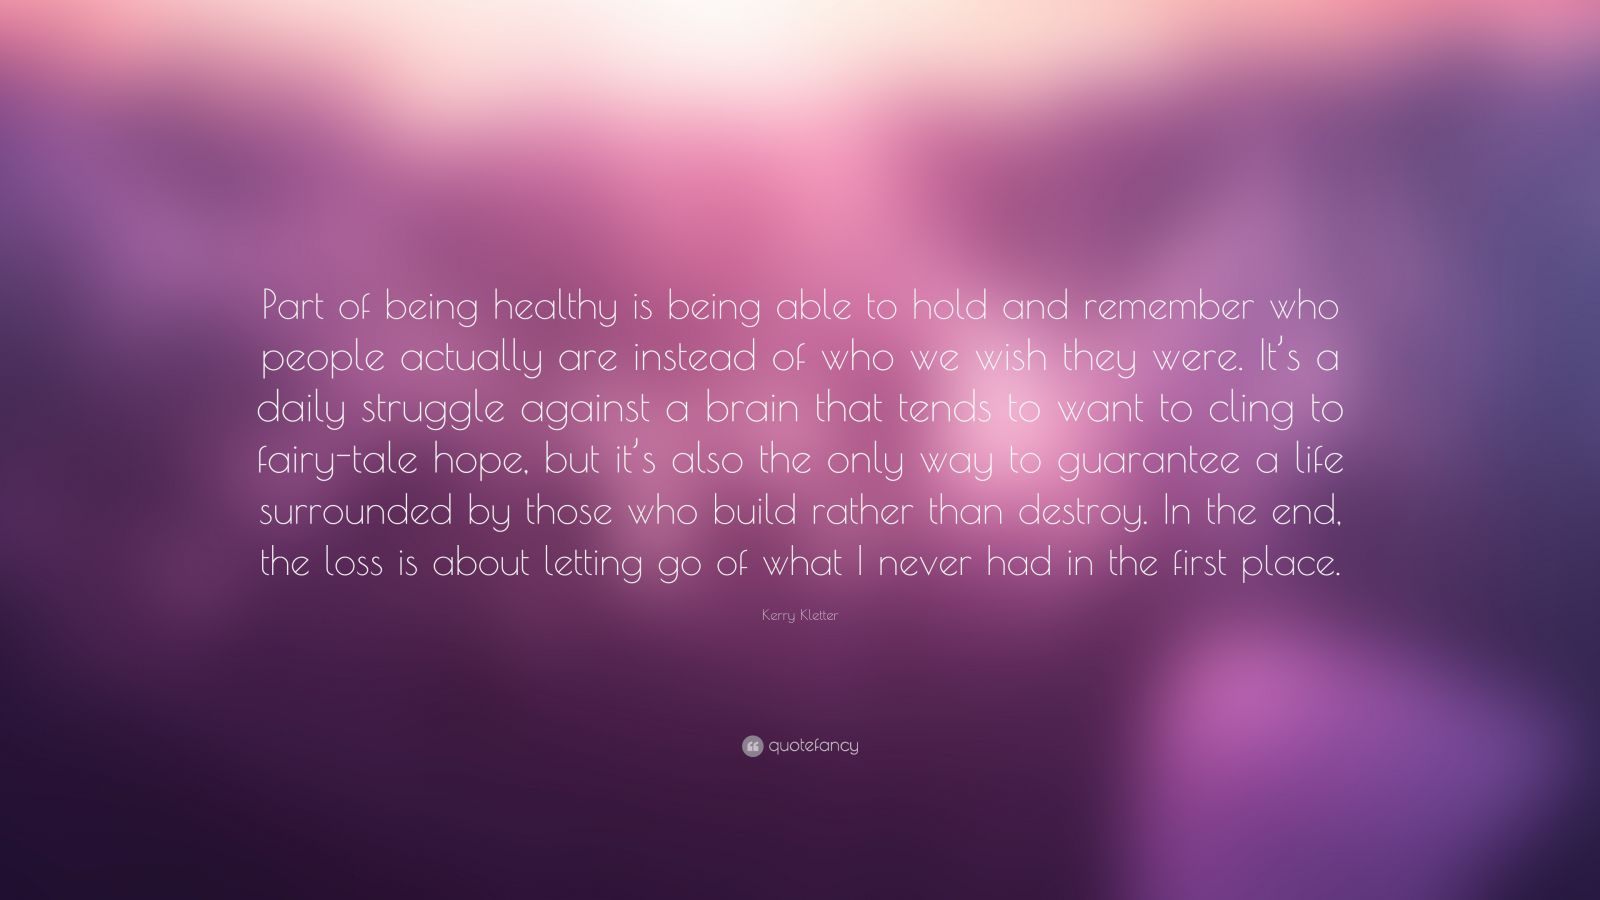 Kerry Kletter Quote: “Part of being healthy is being able to hold and ...